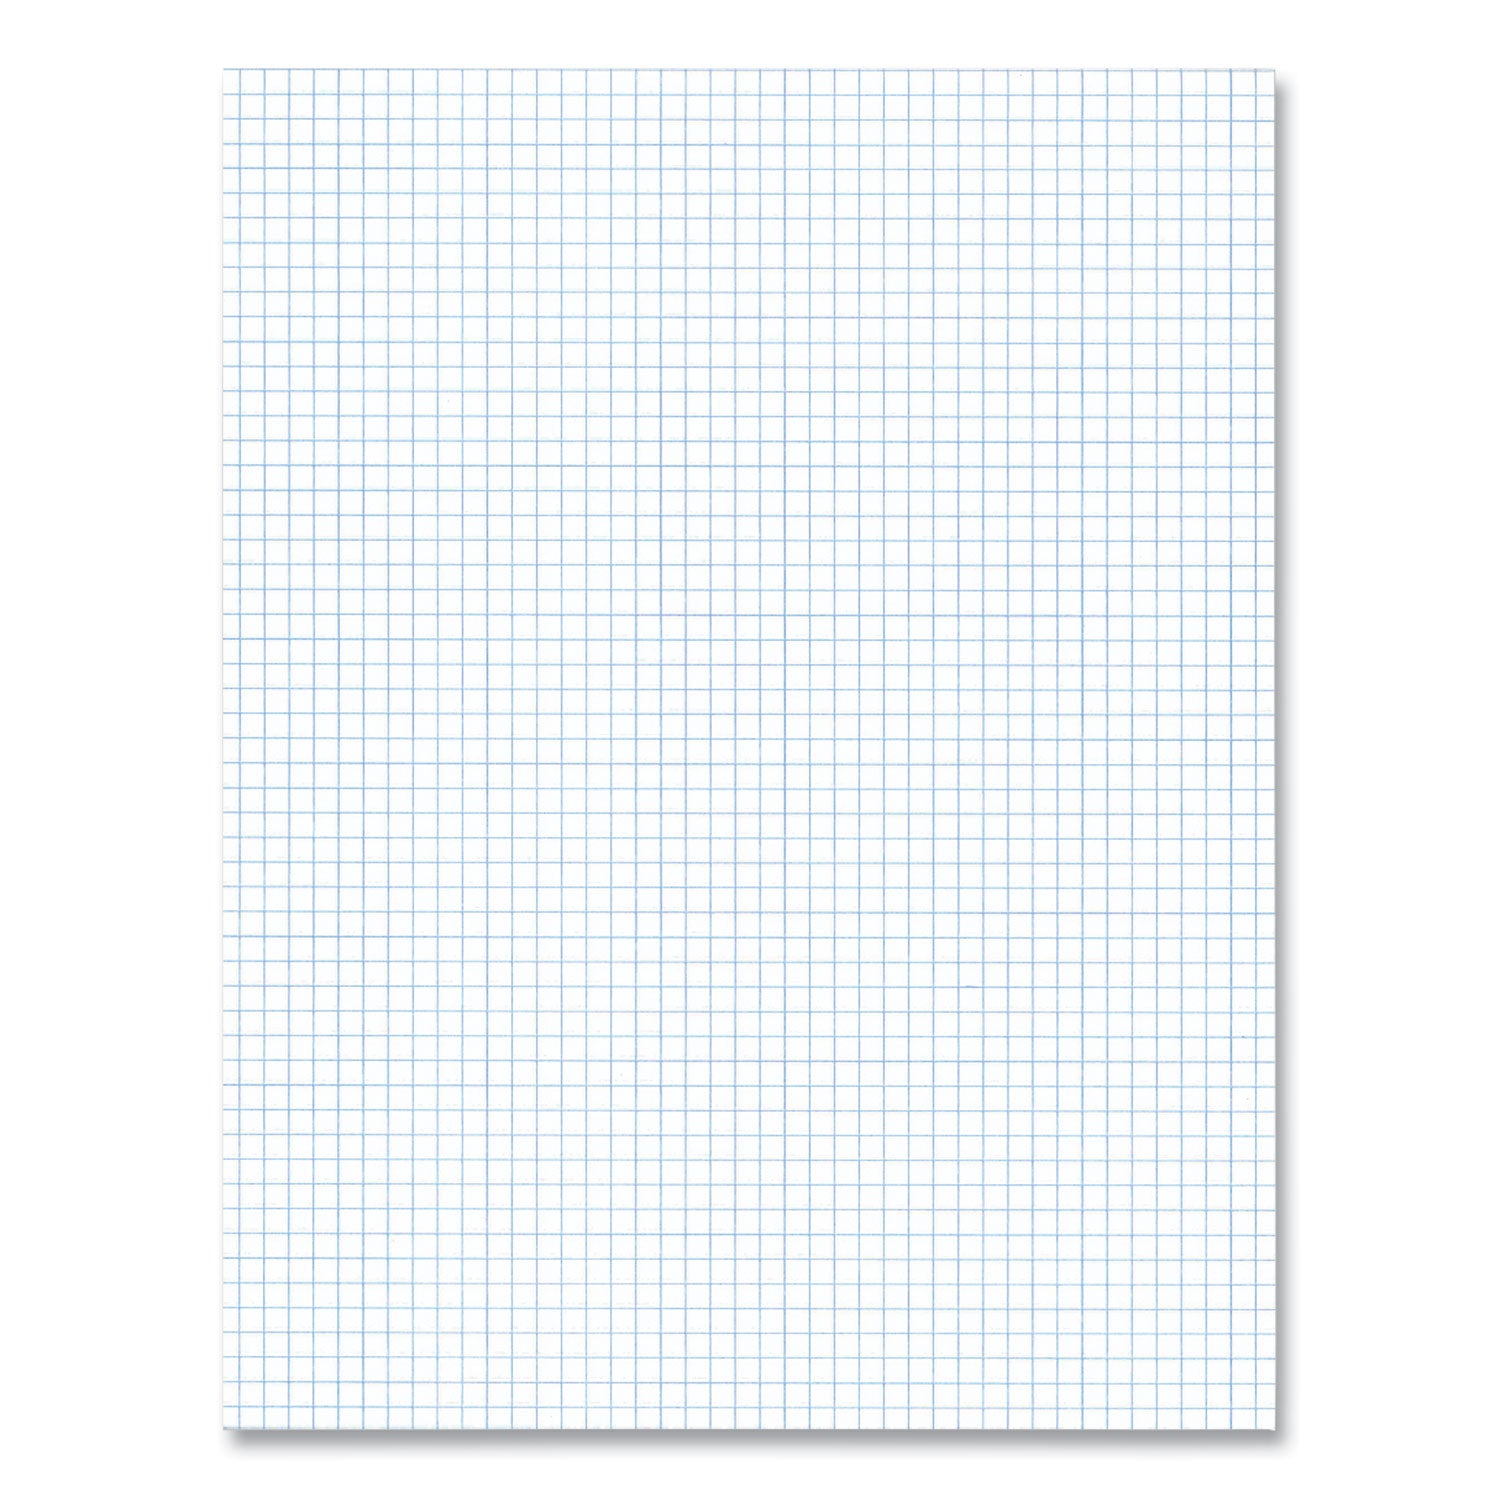 gummed-pad-5-sq-in-quadrille-rule-50-white-85-x-11-sheets-72-carton-ships-in-4-6-business-days_roa95161cs - 5